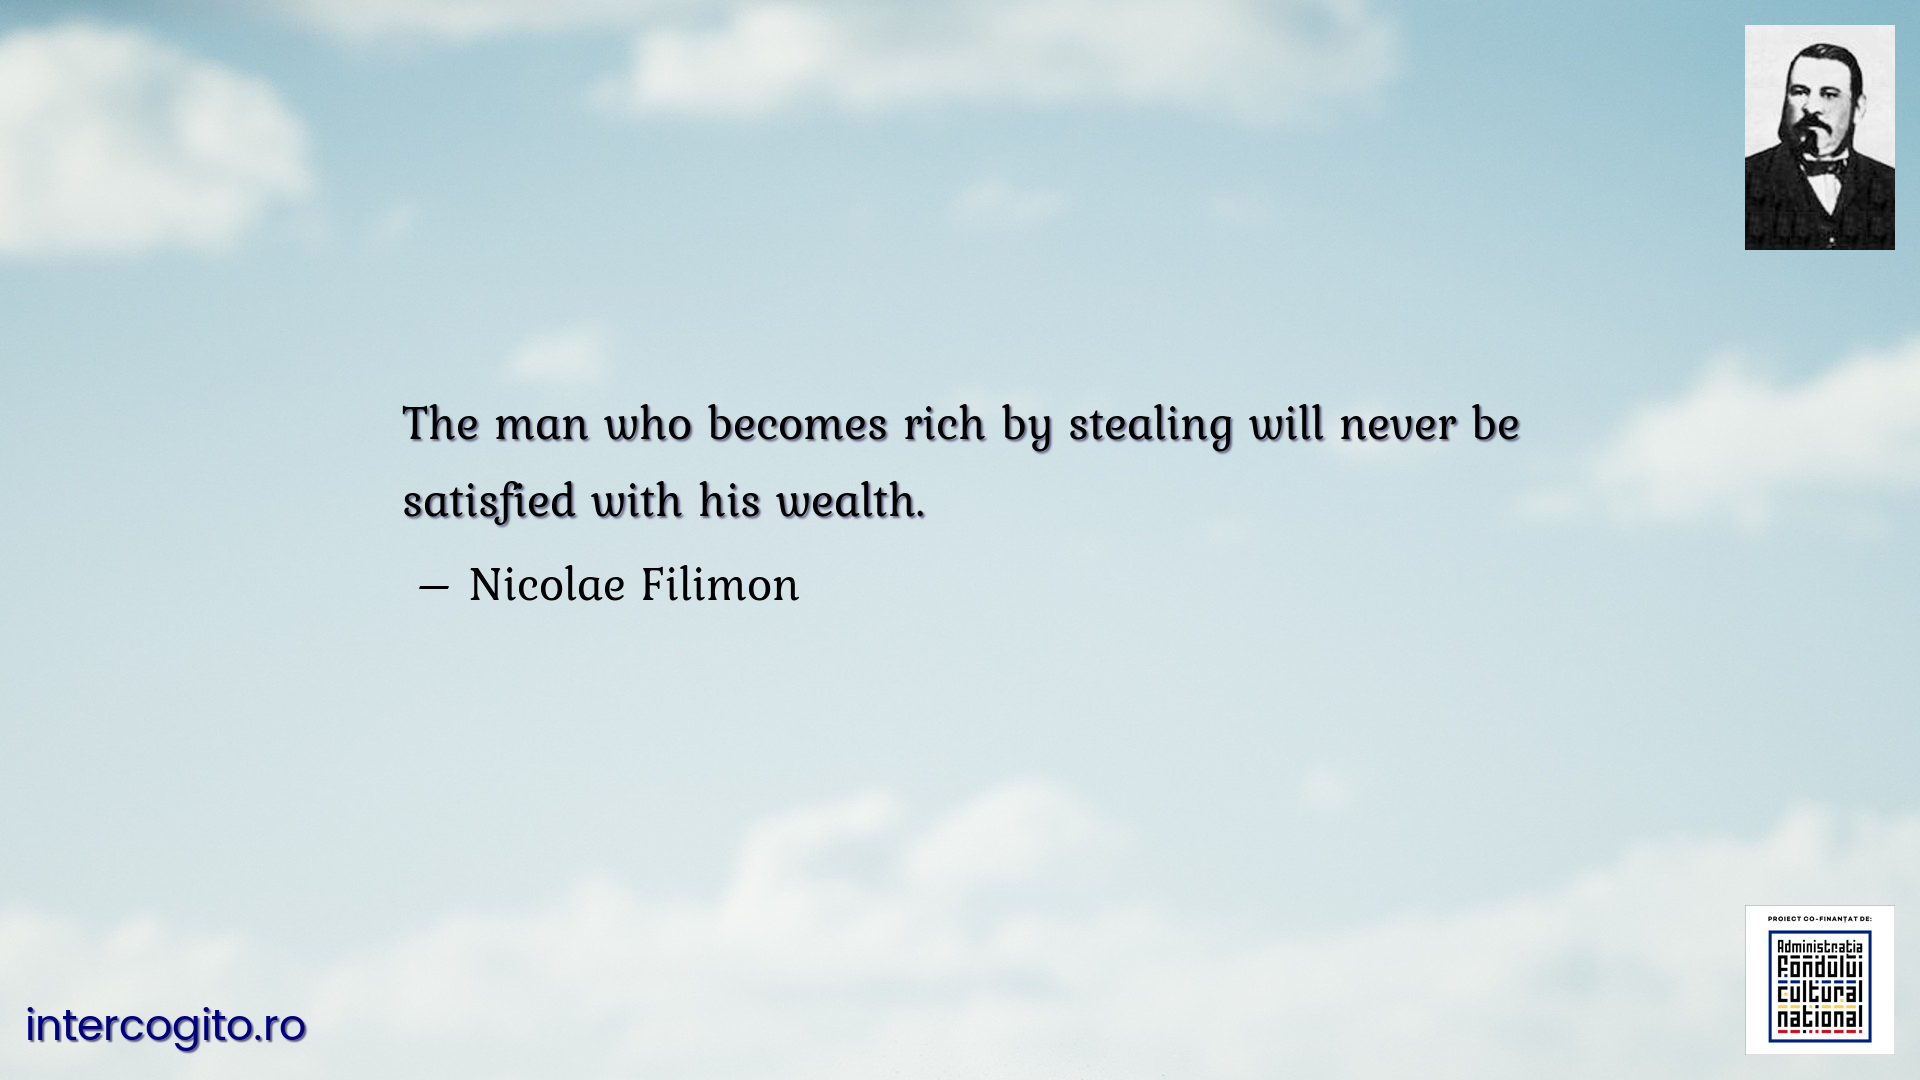 The man who becomes rich by stealing will never be satisfied with his wealth.